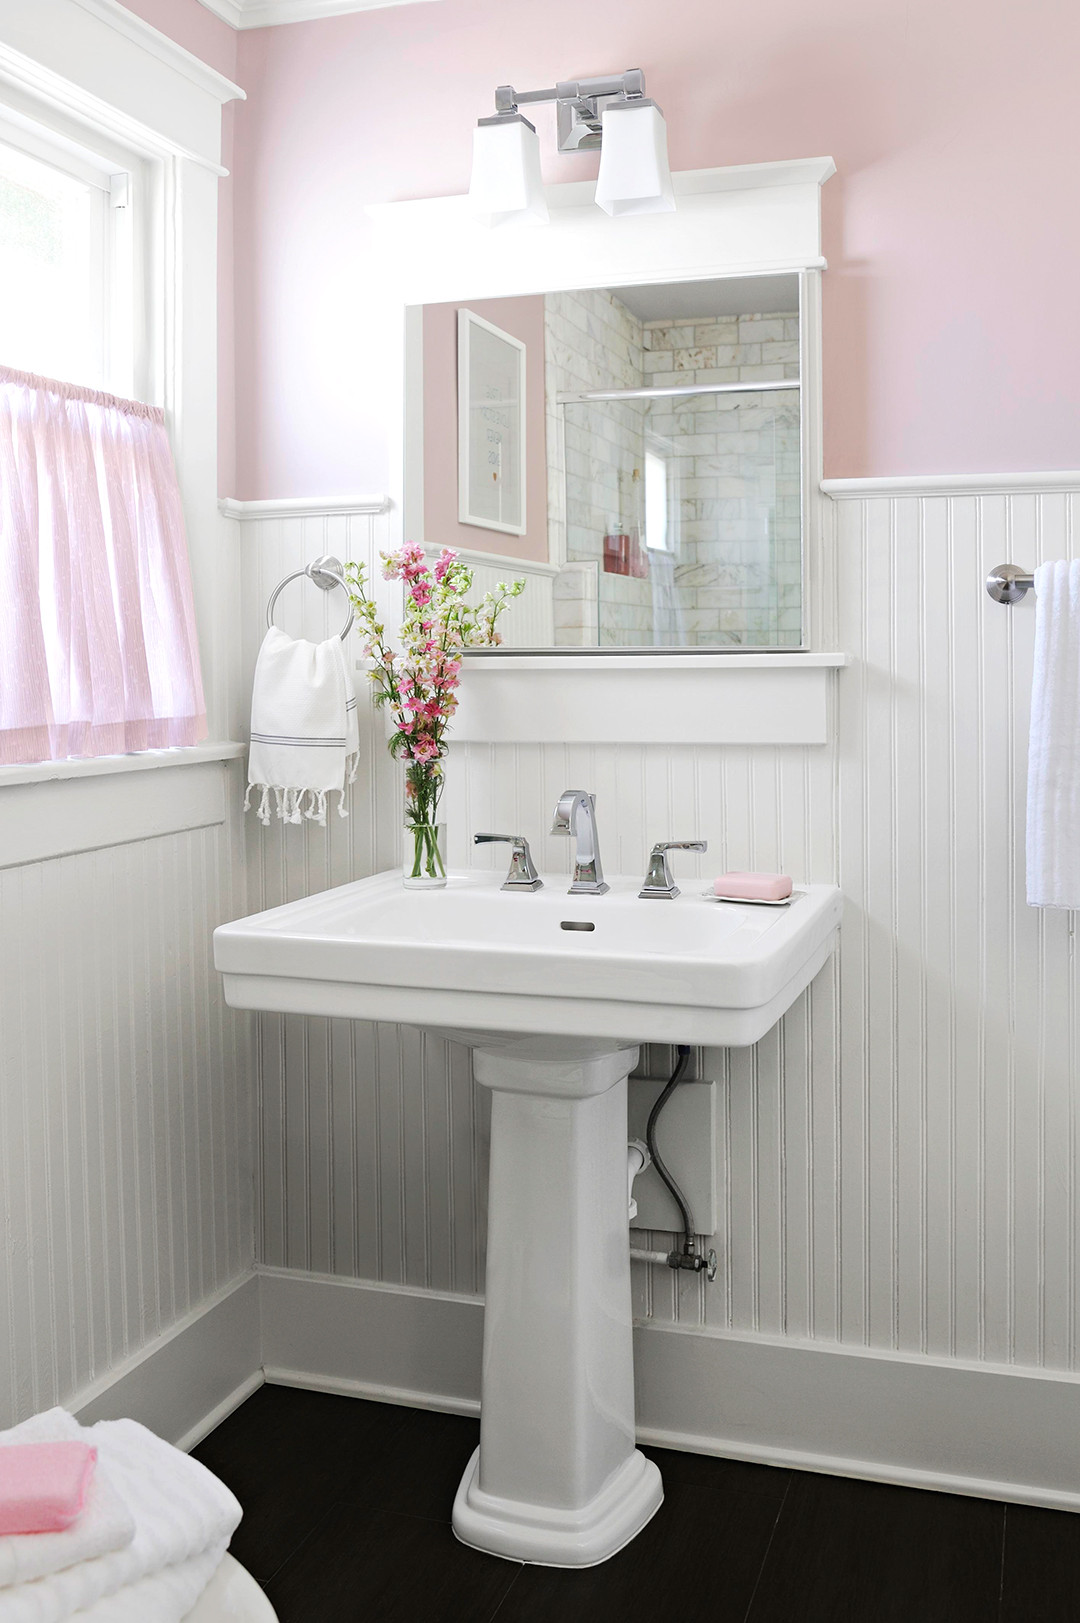 Paint Colors For Small Bathrooms
 Popular Bathroom Paint Colors